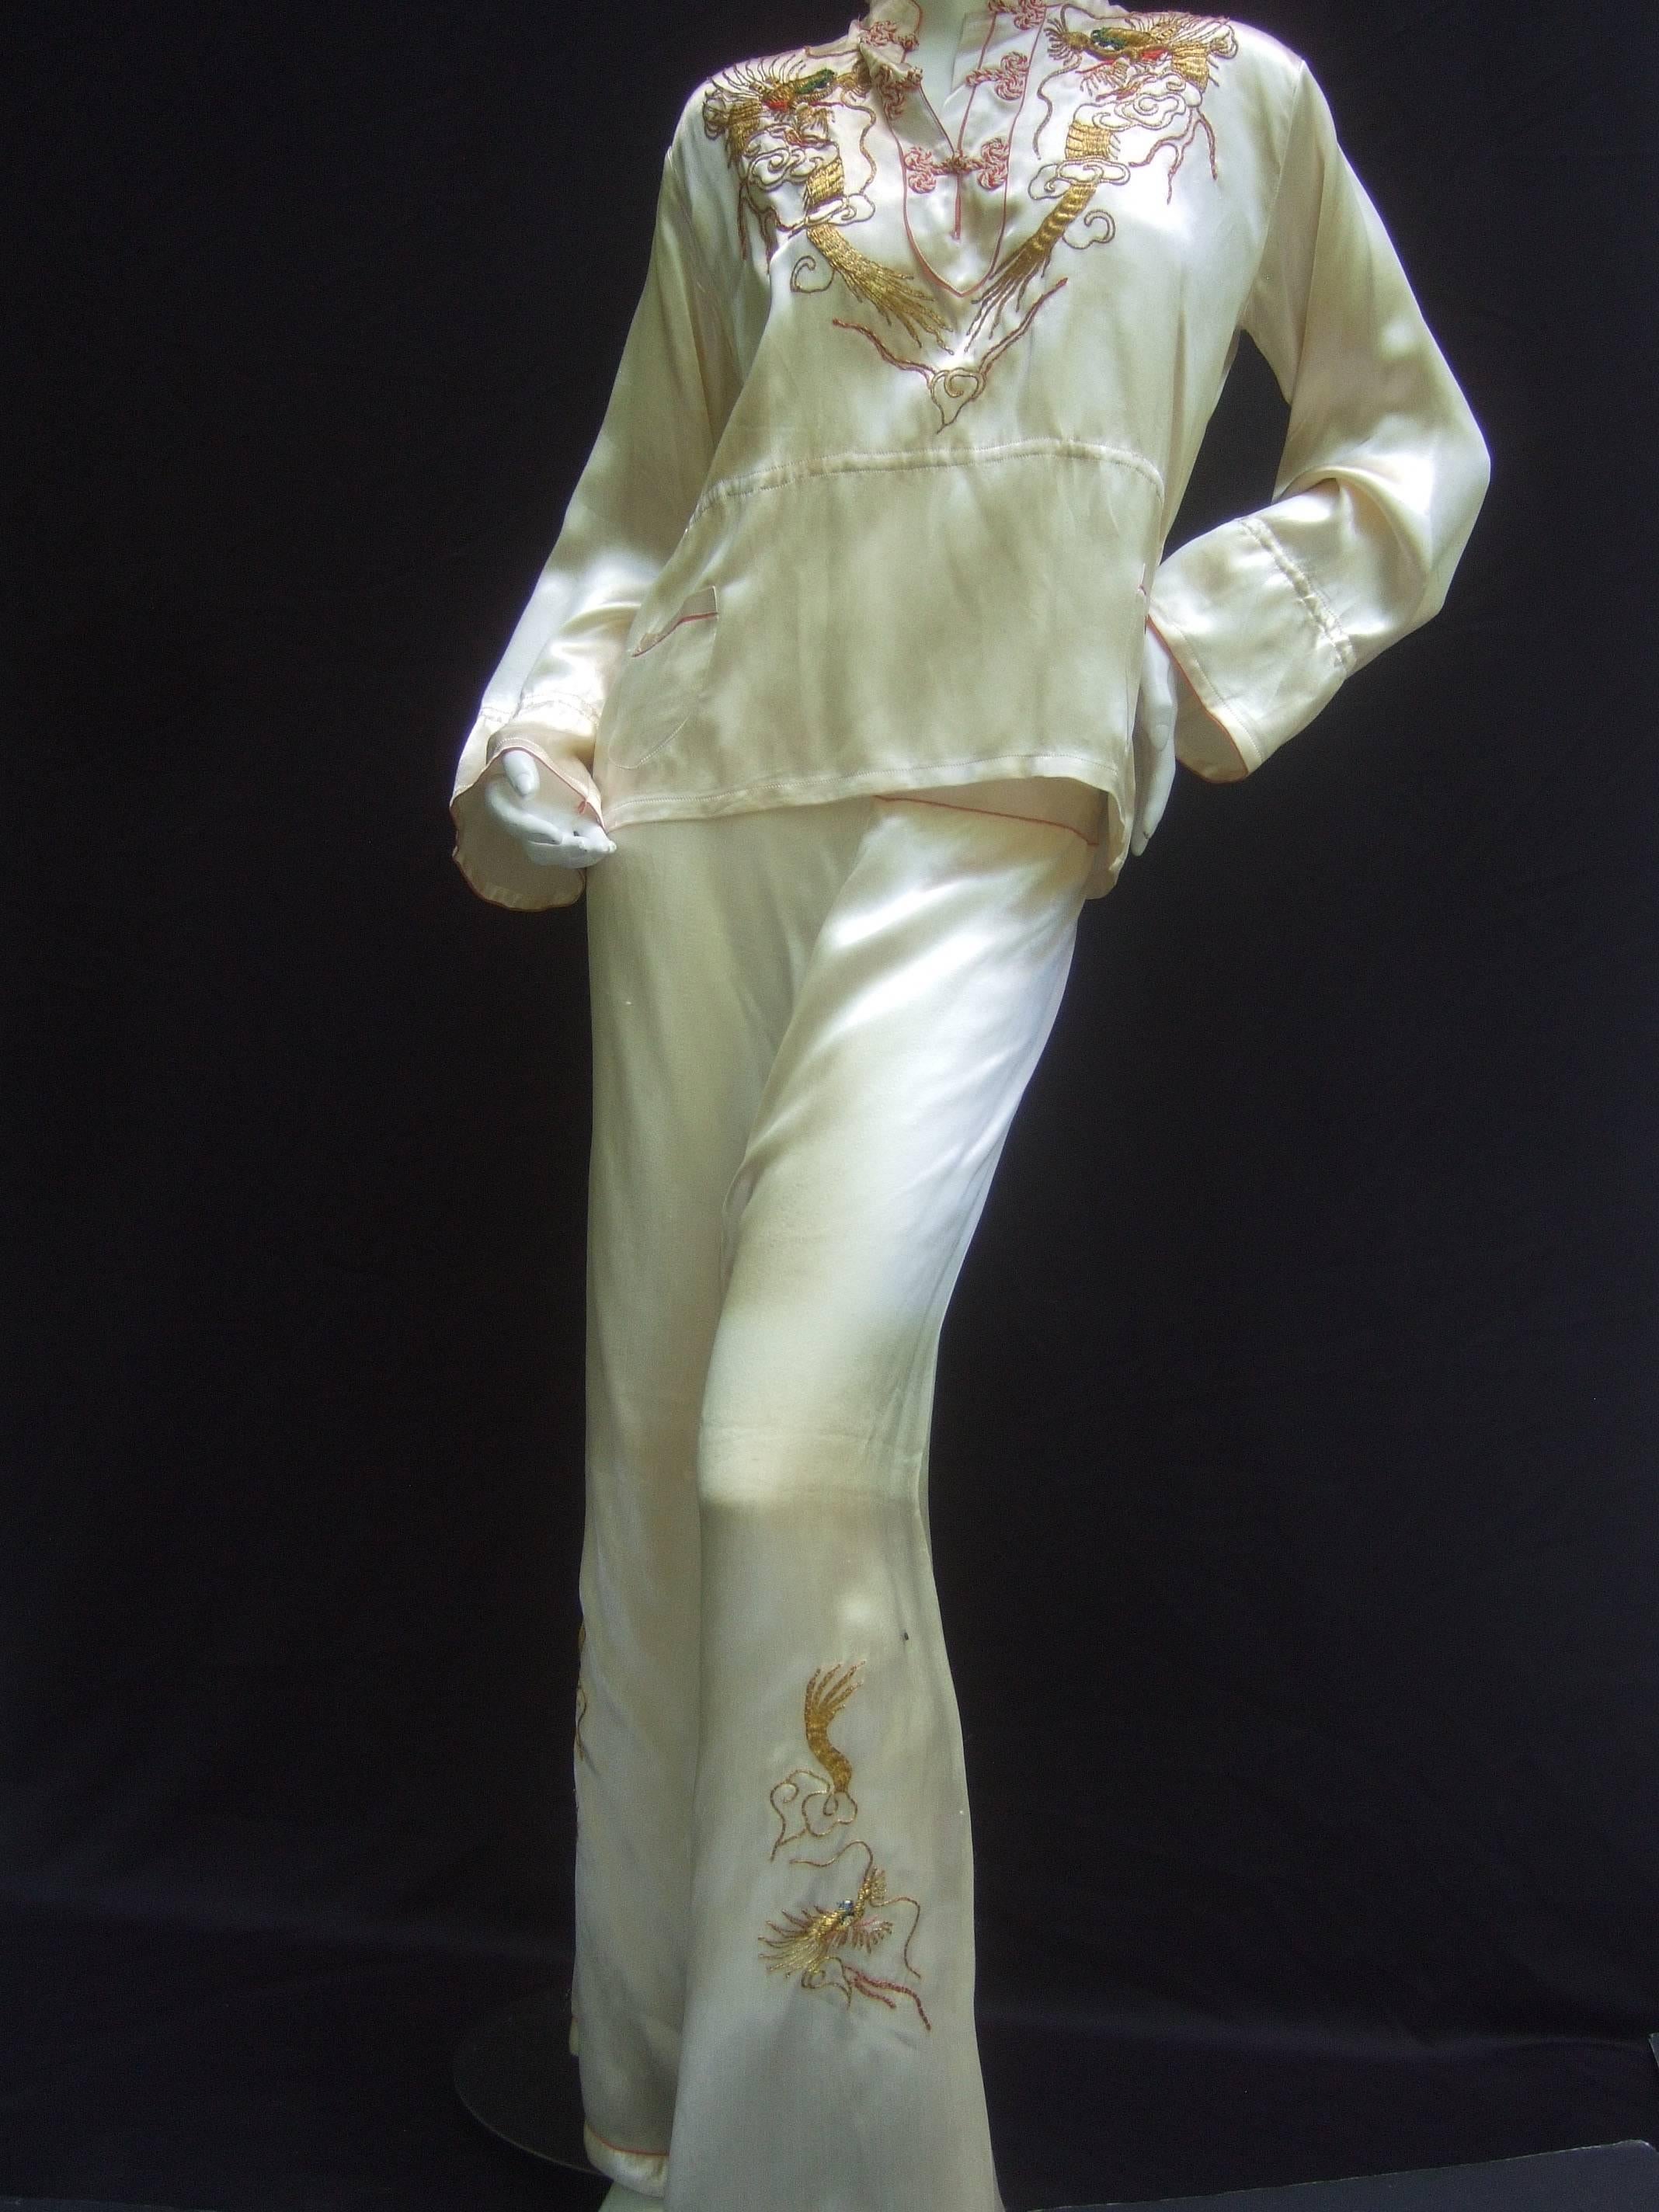 Luxurious ivory satin Asian embroidered lounge pajamas c 1950s
The exotic retro pajamas are designed with sumptuous  
satin. The tunic style blouse is embellished with exotic
gold metallic embroidery depicting dragons on the bodice
Accented with